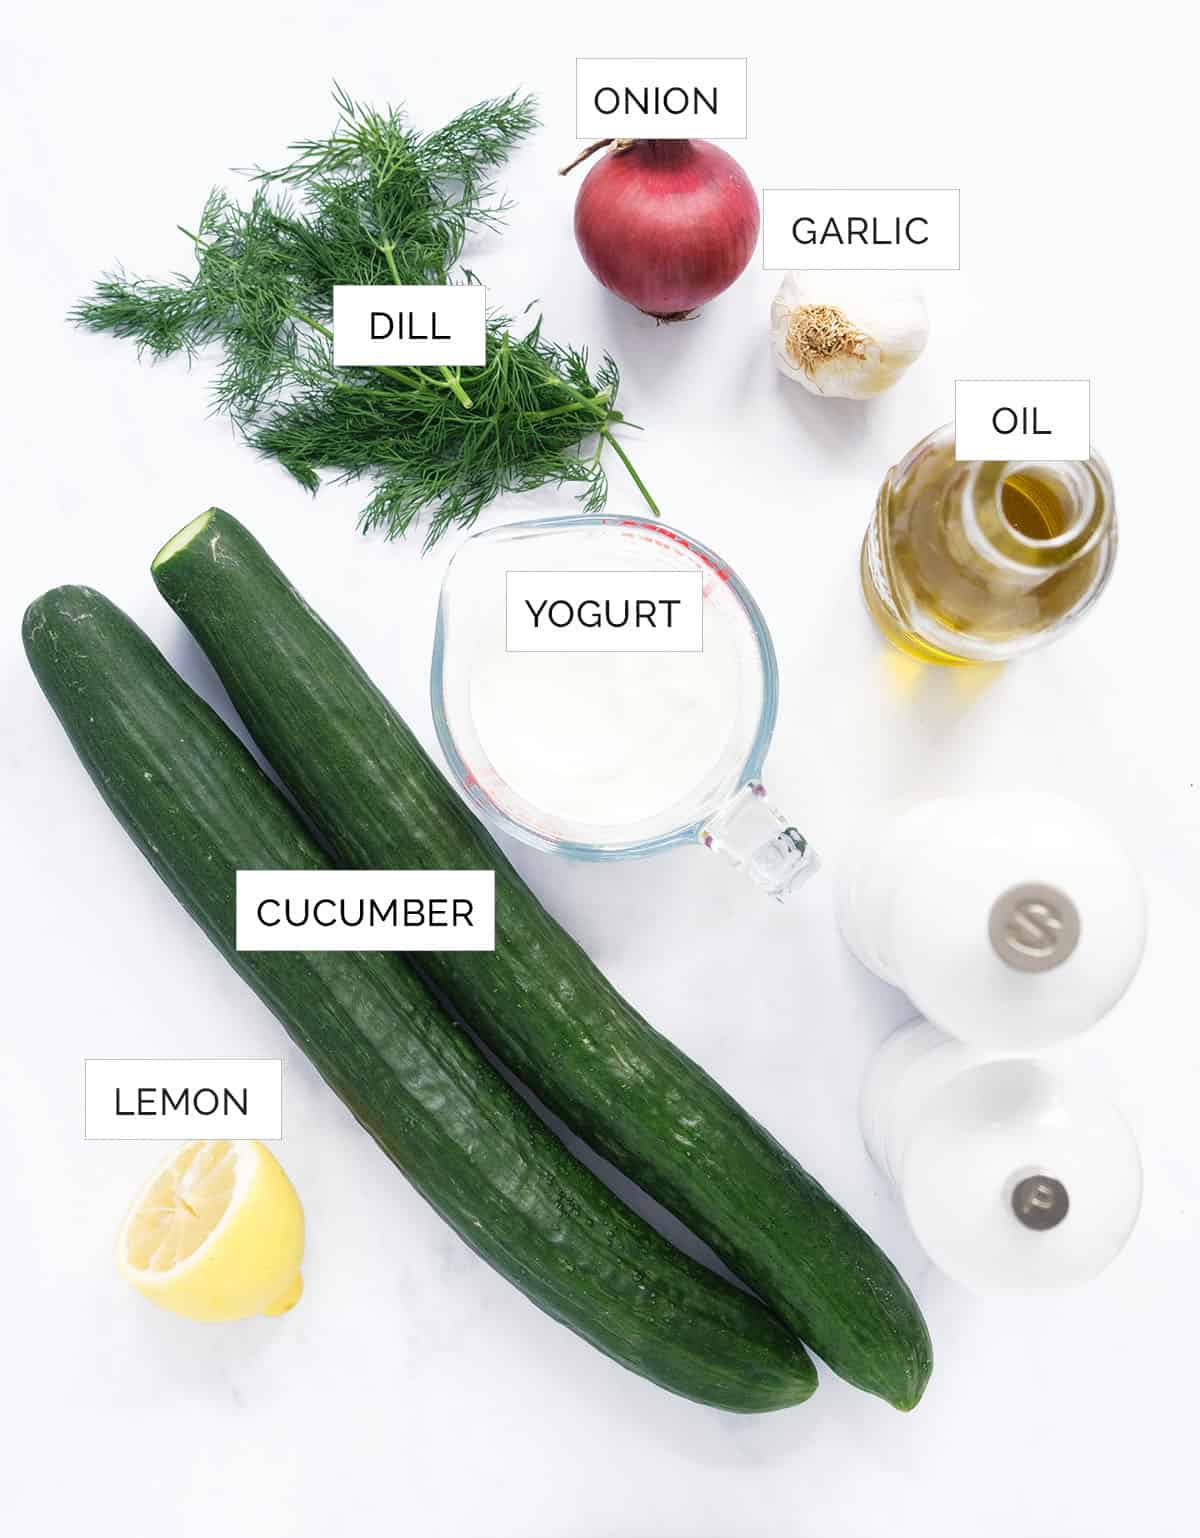 The ingredients to make this cucumber dill salad are arranged over a white background.